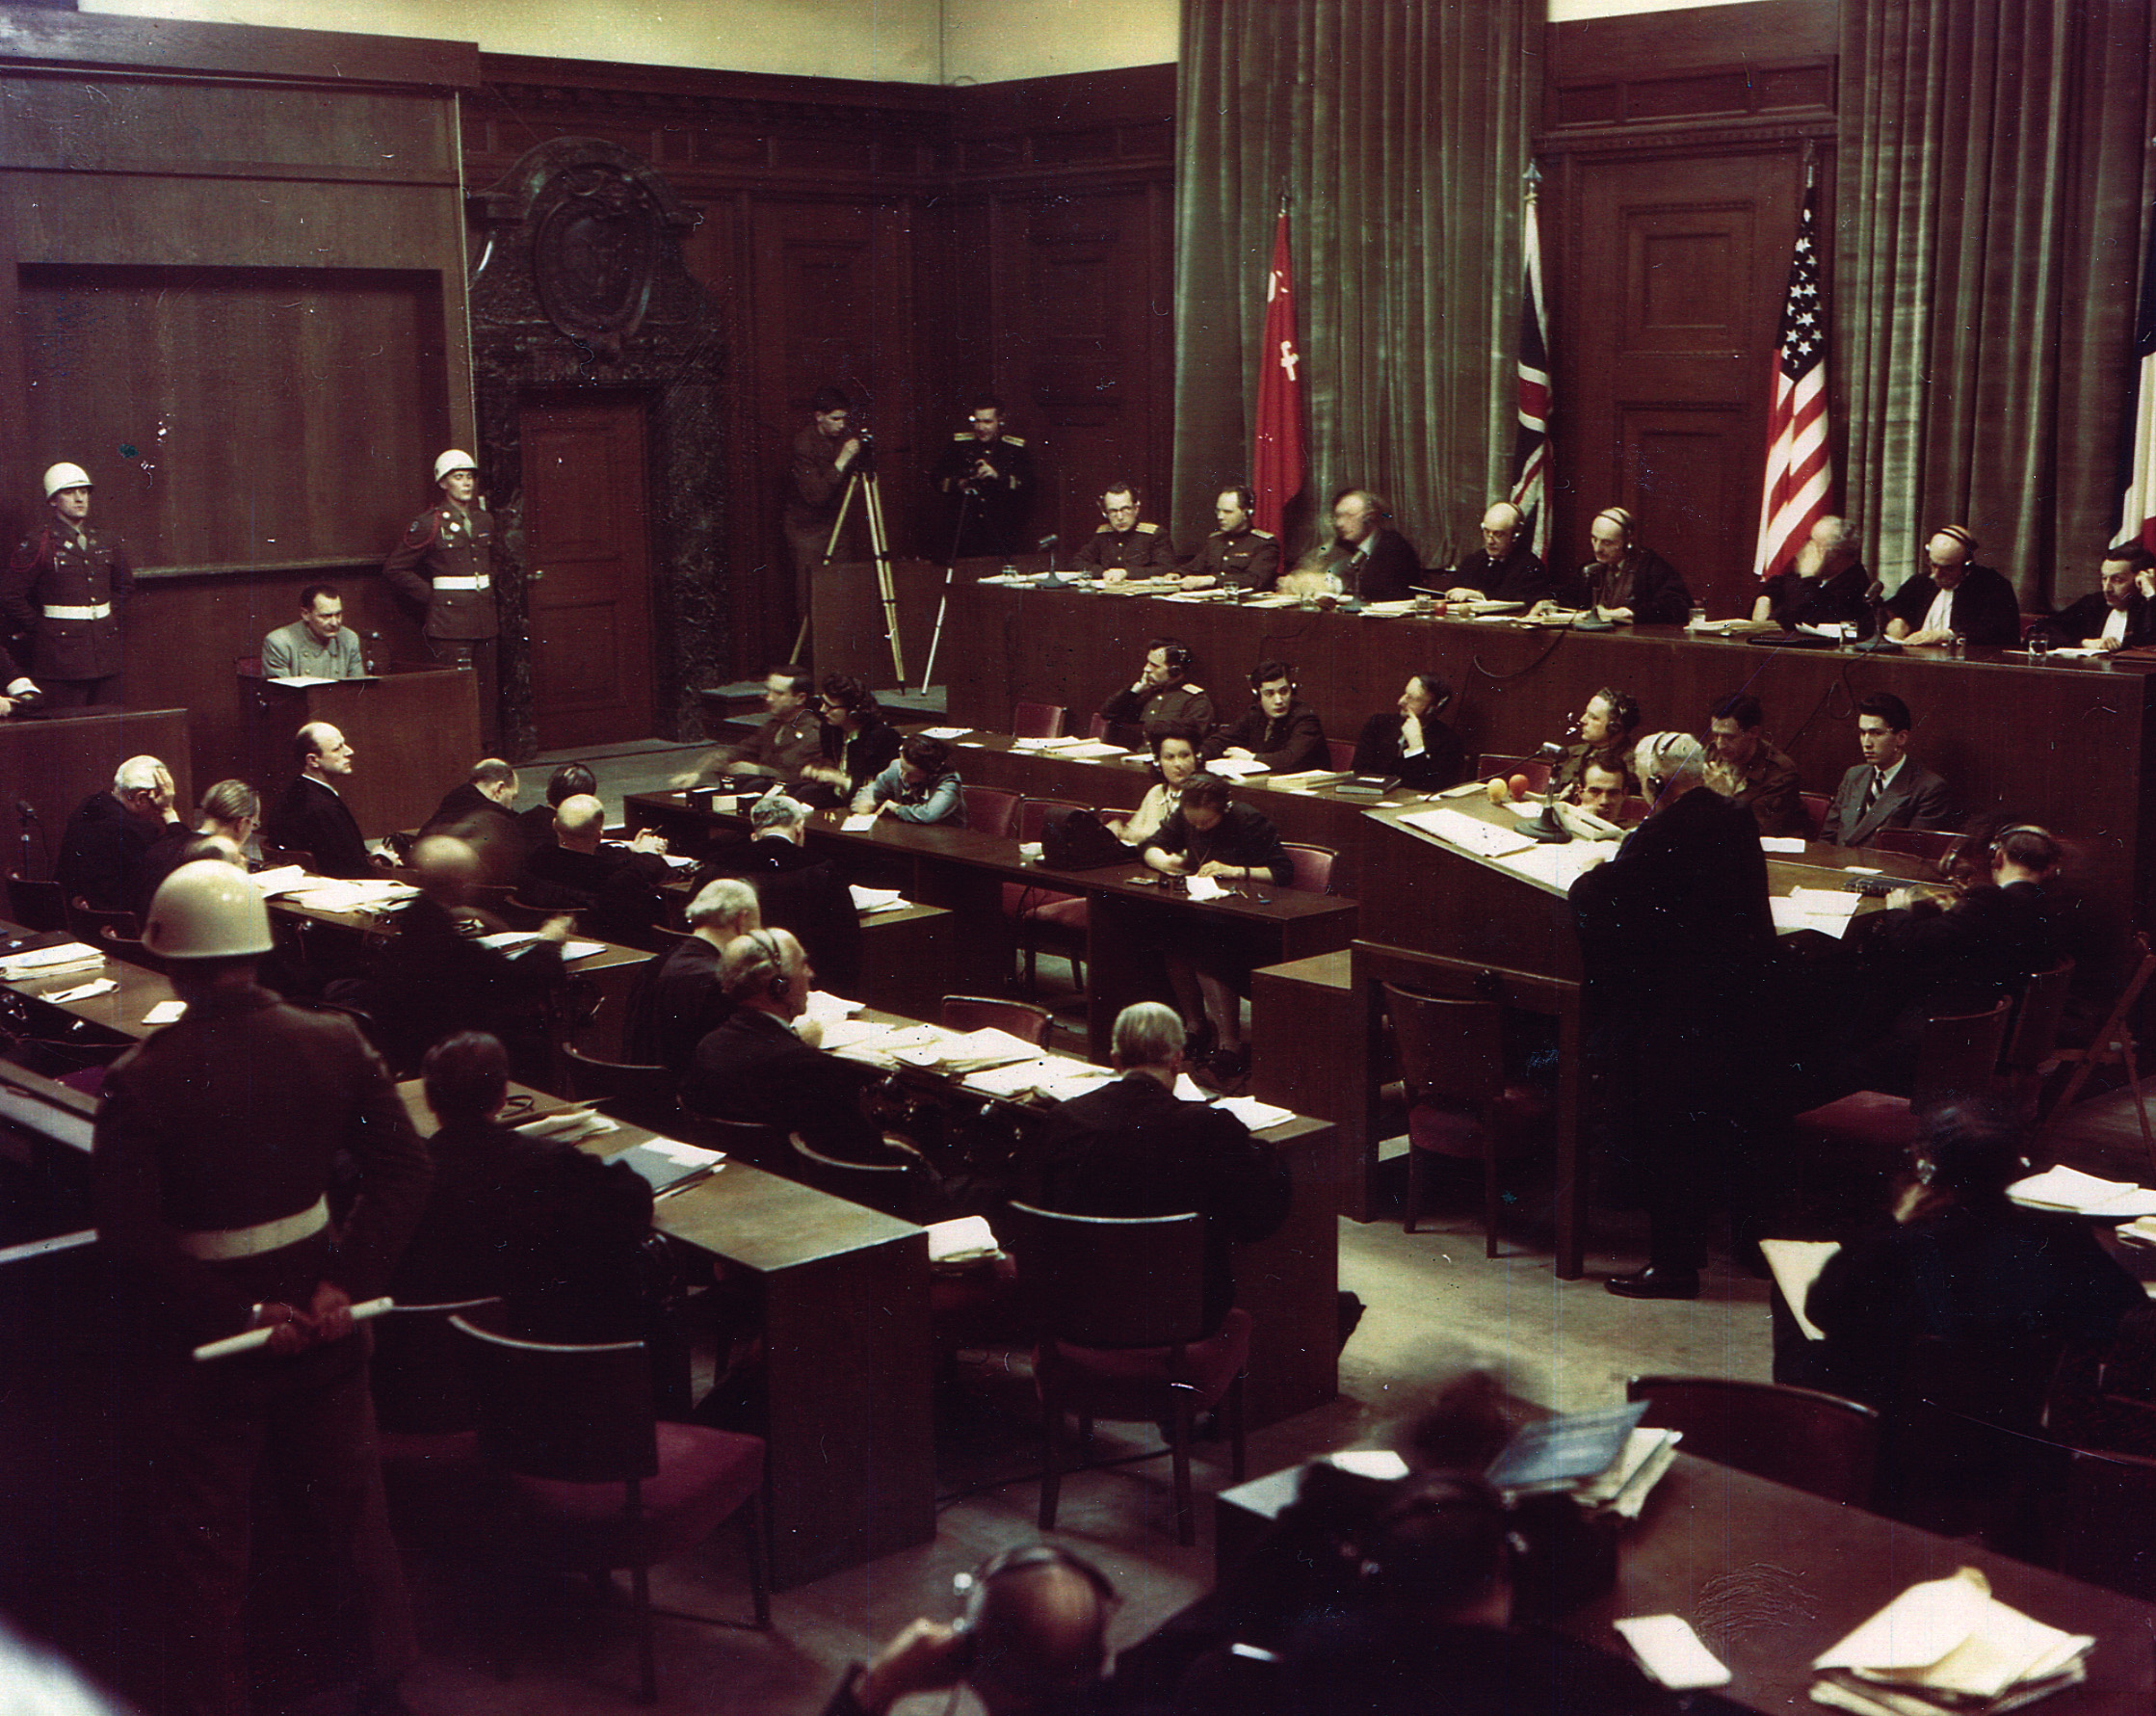 Göring, seated on the witness stand, is addressed by Dr. Otto Stahmer at the podium.